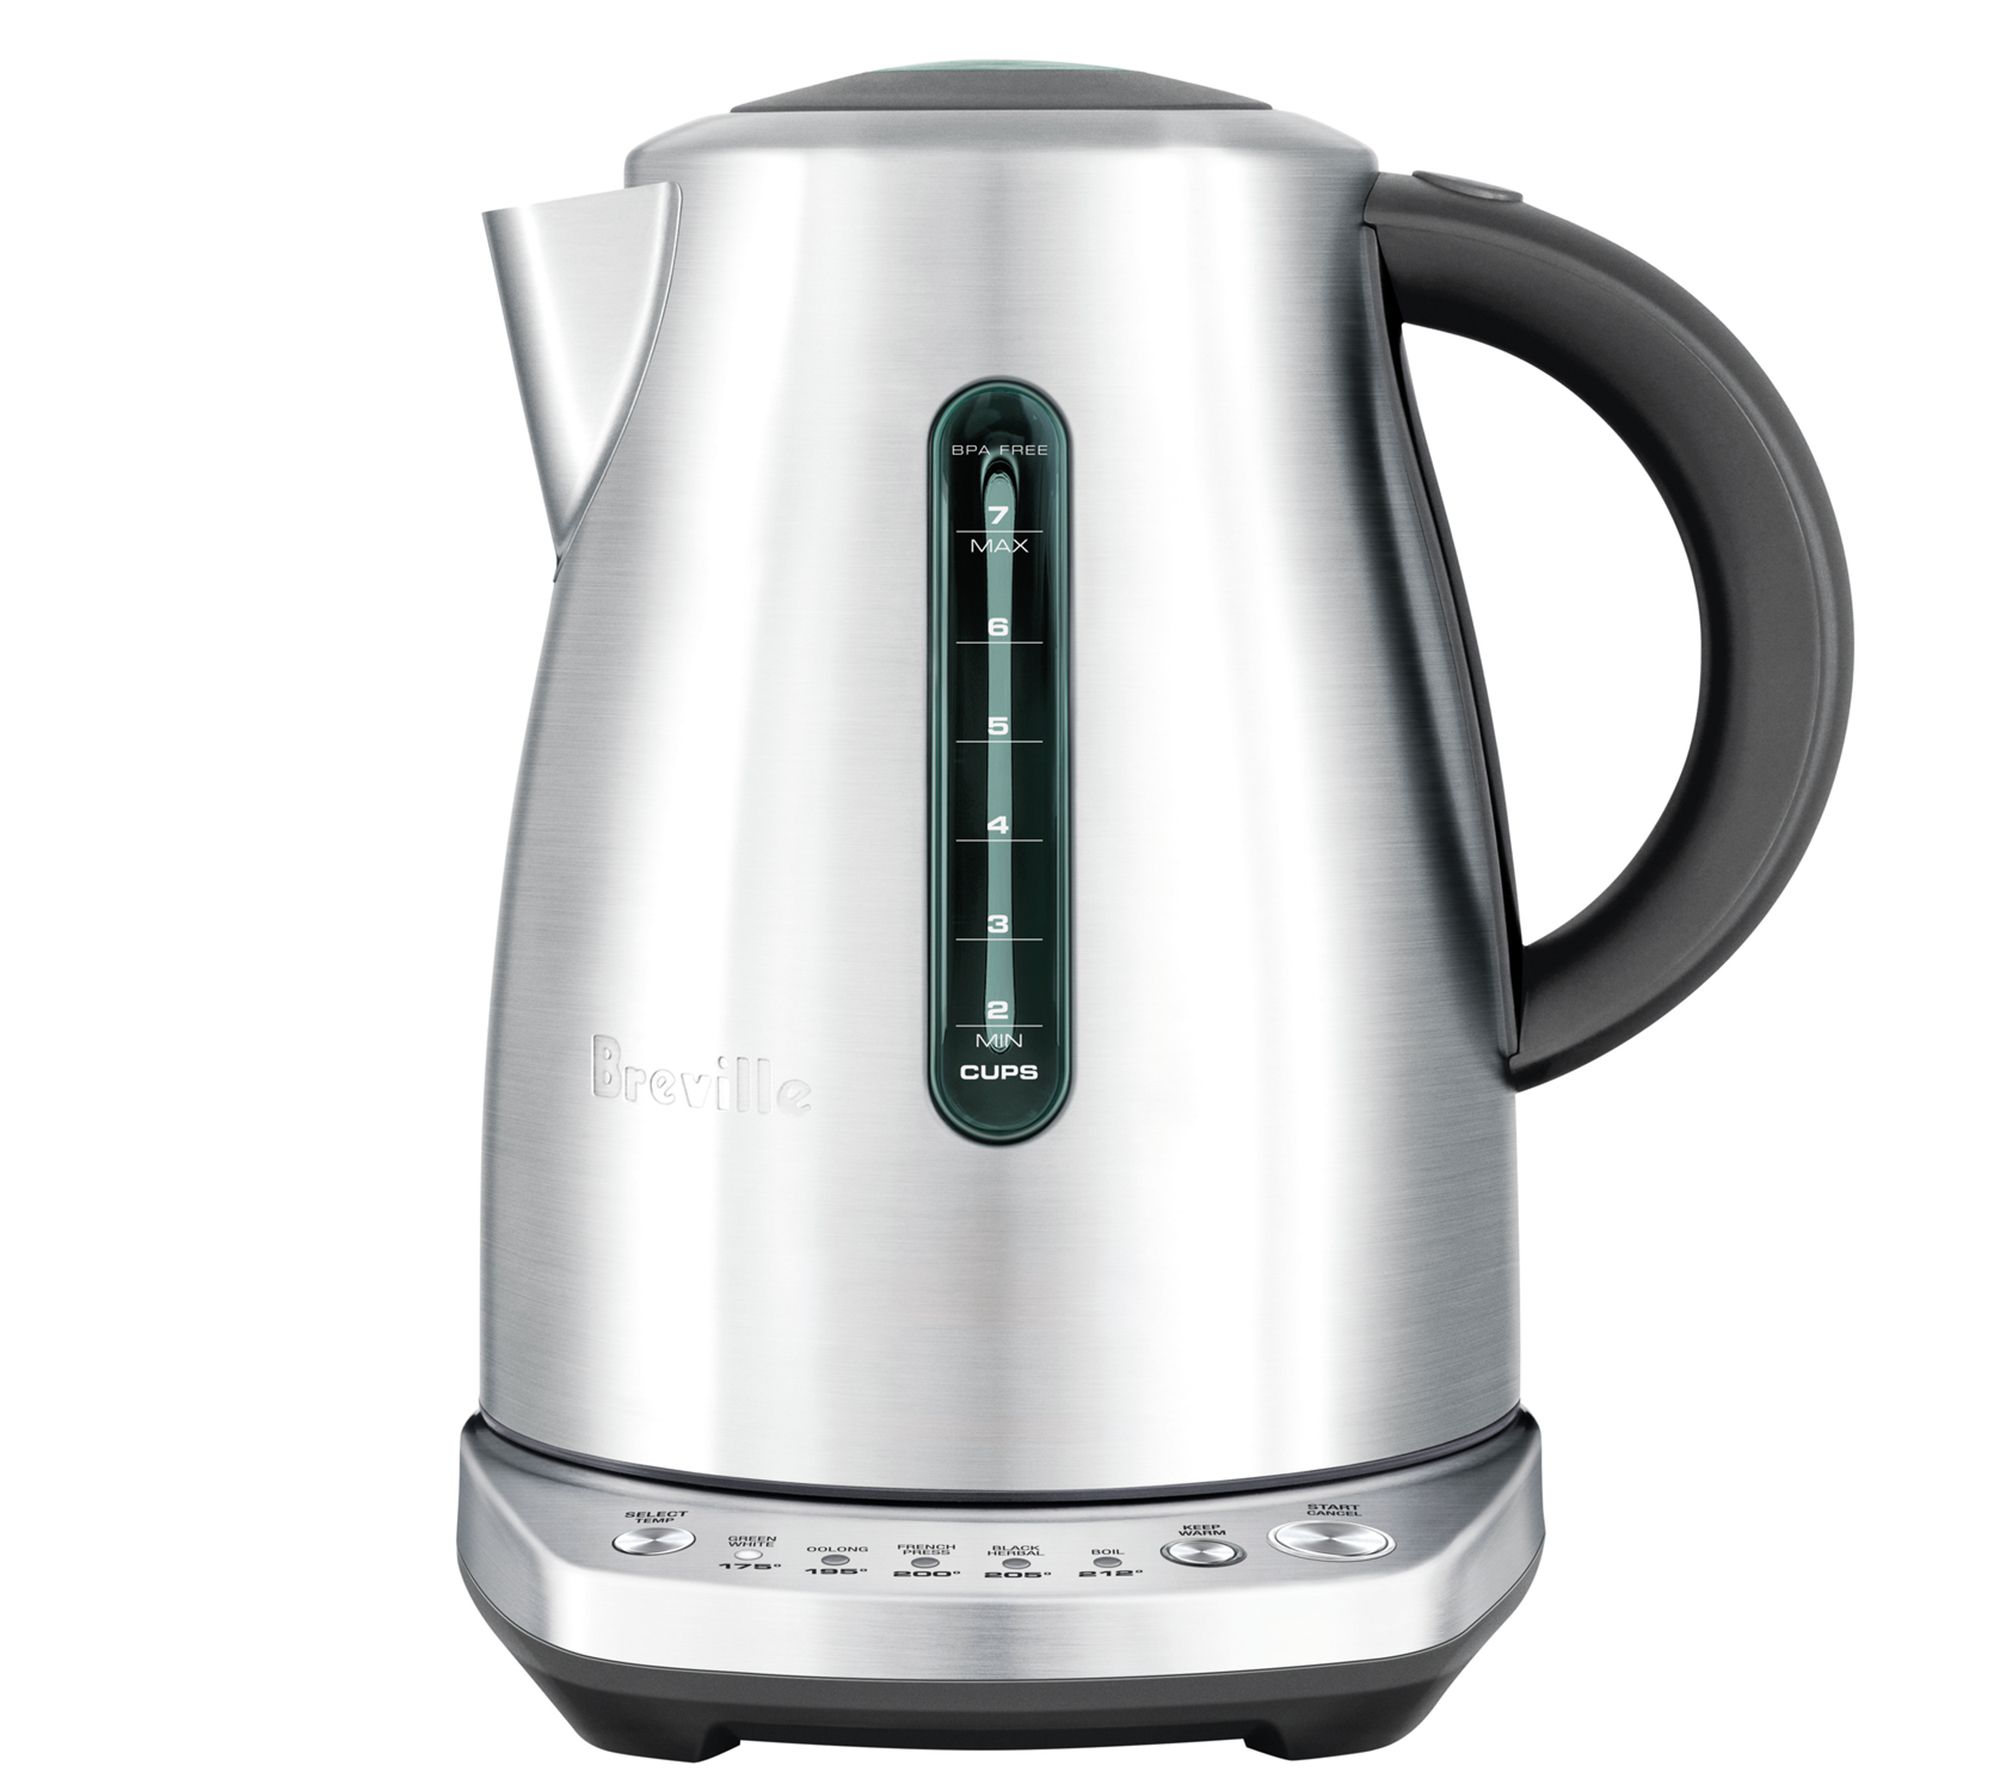 Oster - Electric Kettle, 1.7L Capacity, Black 